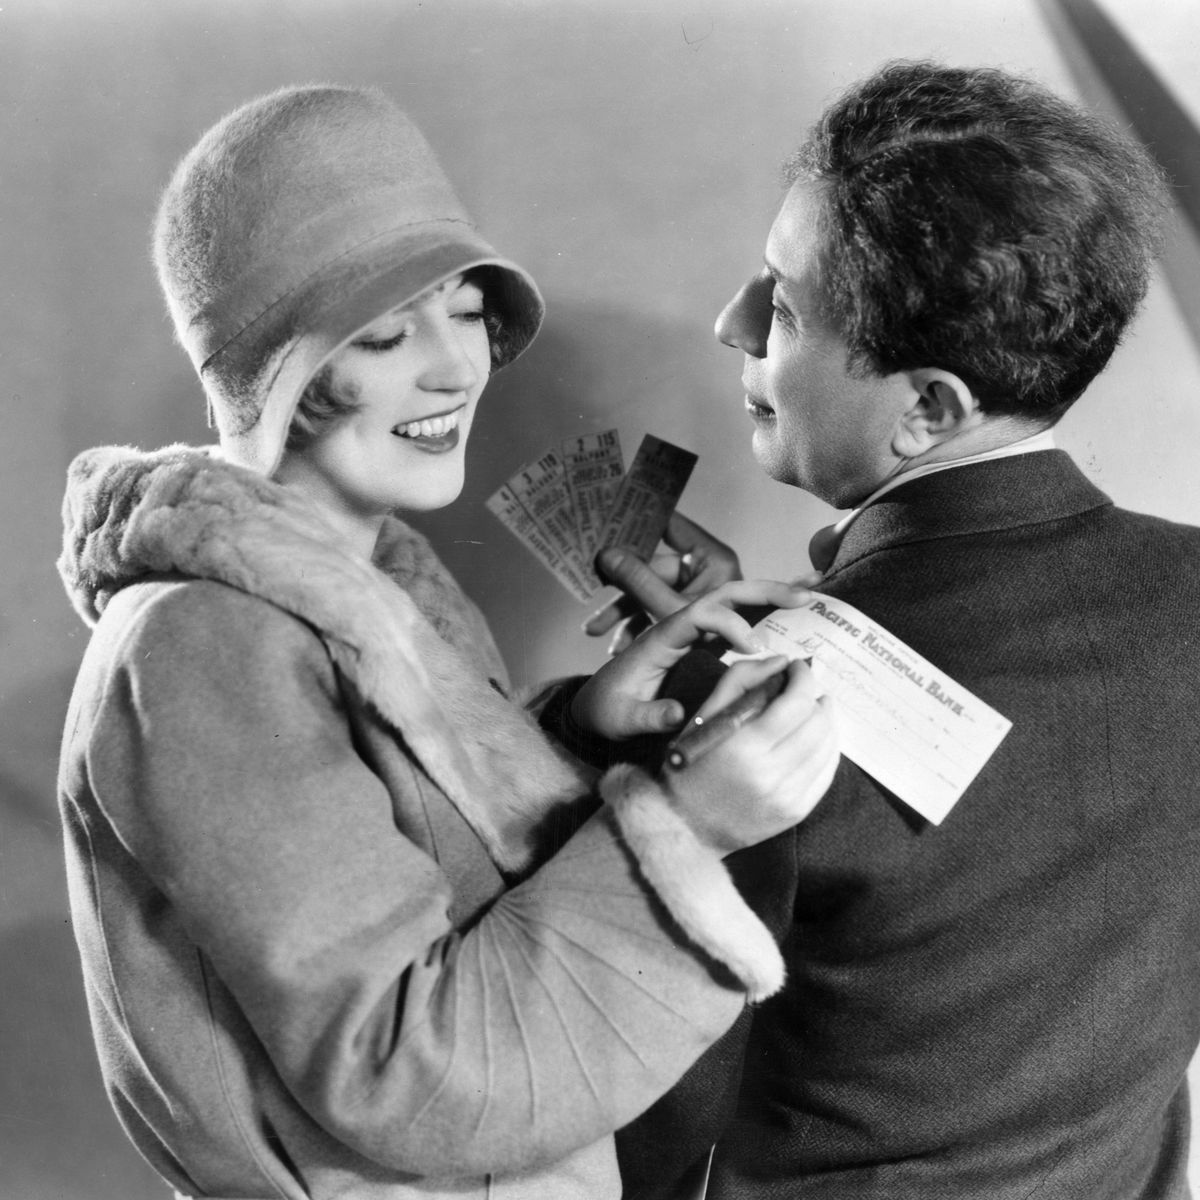 https://hips.hearstapps.com/hmg-prod/images/smiling-marion-davies-signs-a-cheque-on-sid-graumans-news-photo-1595472906.jpg?crop=0.789xw:1.00xh;0.147xw,0&resize=1200:*